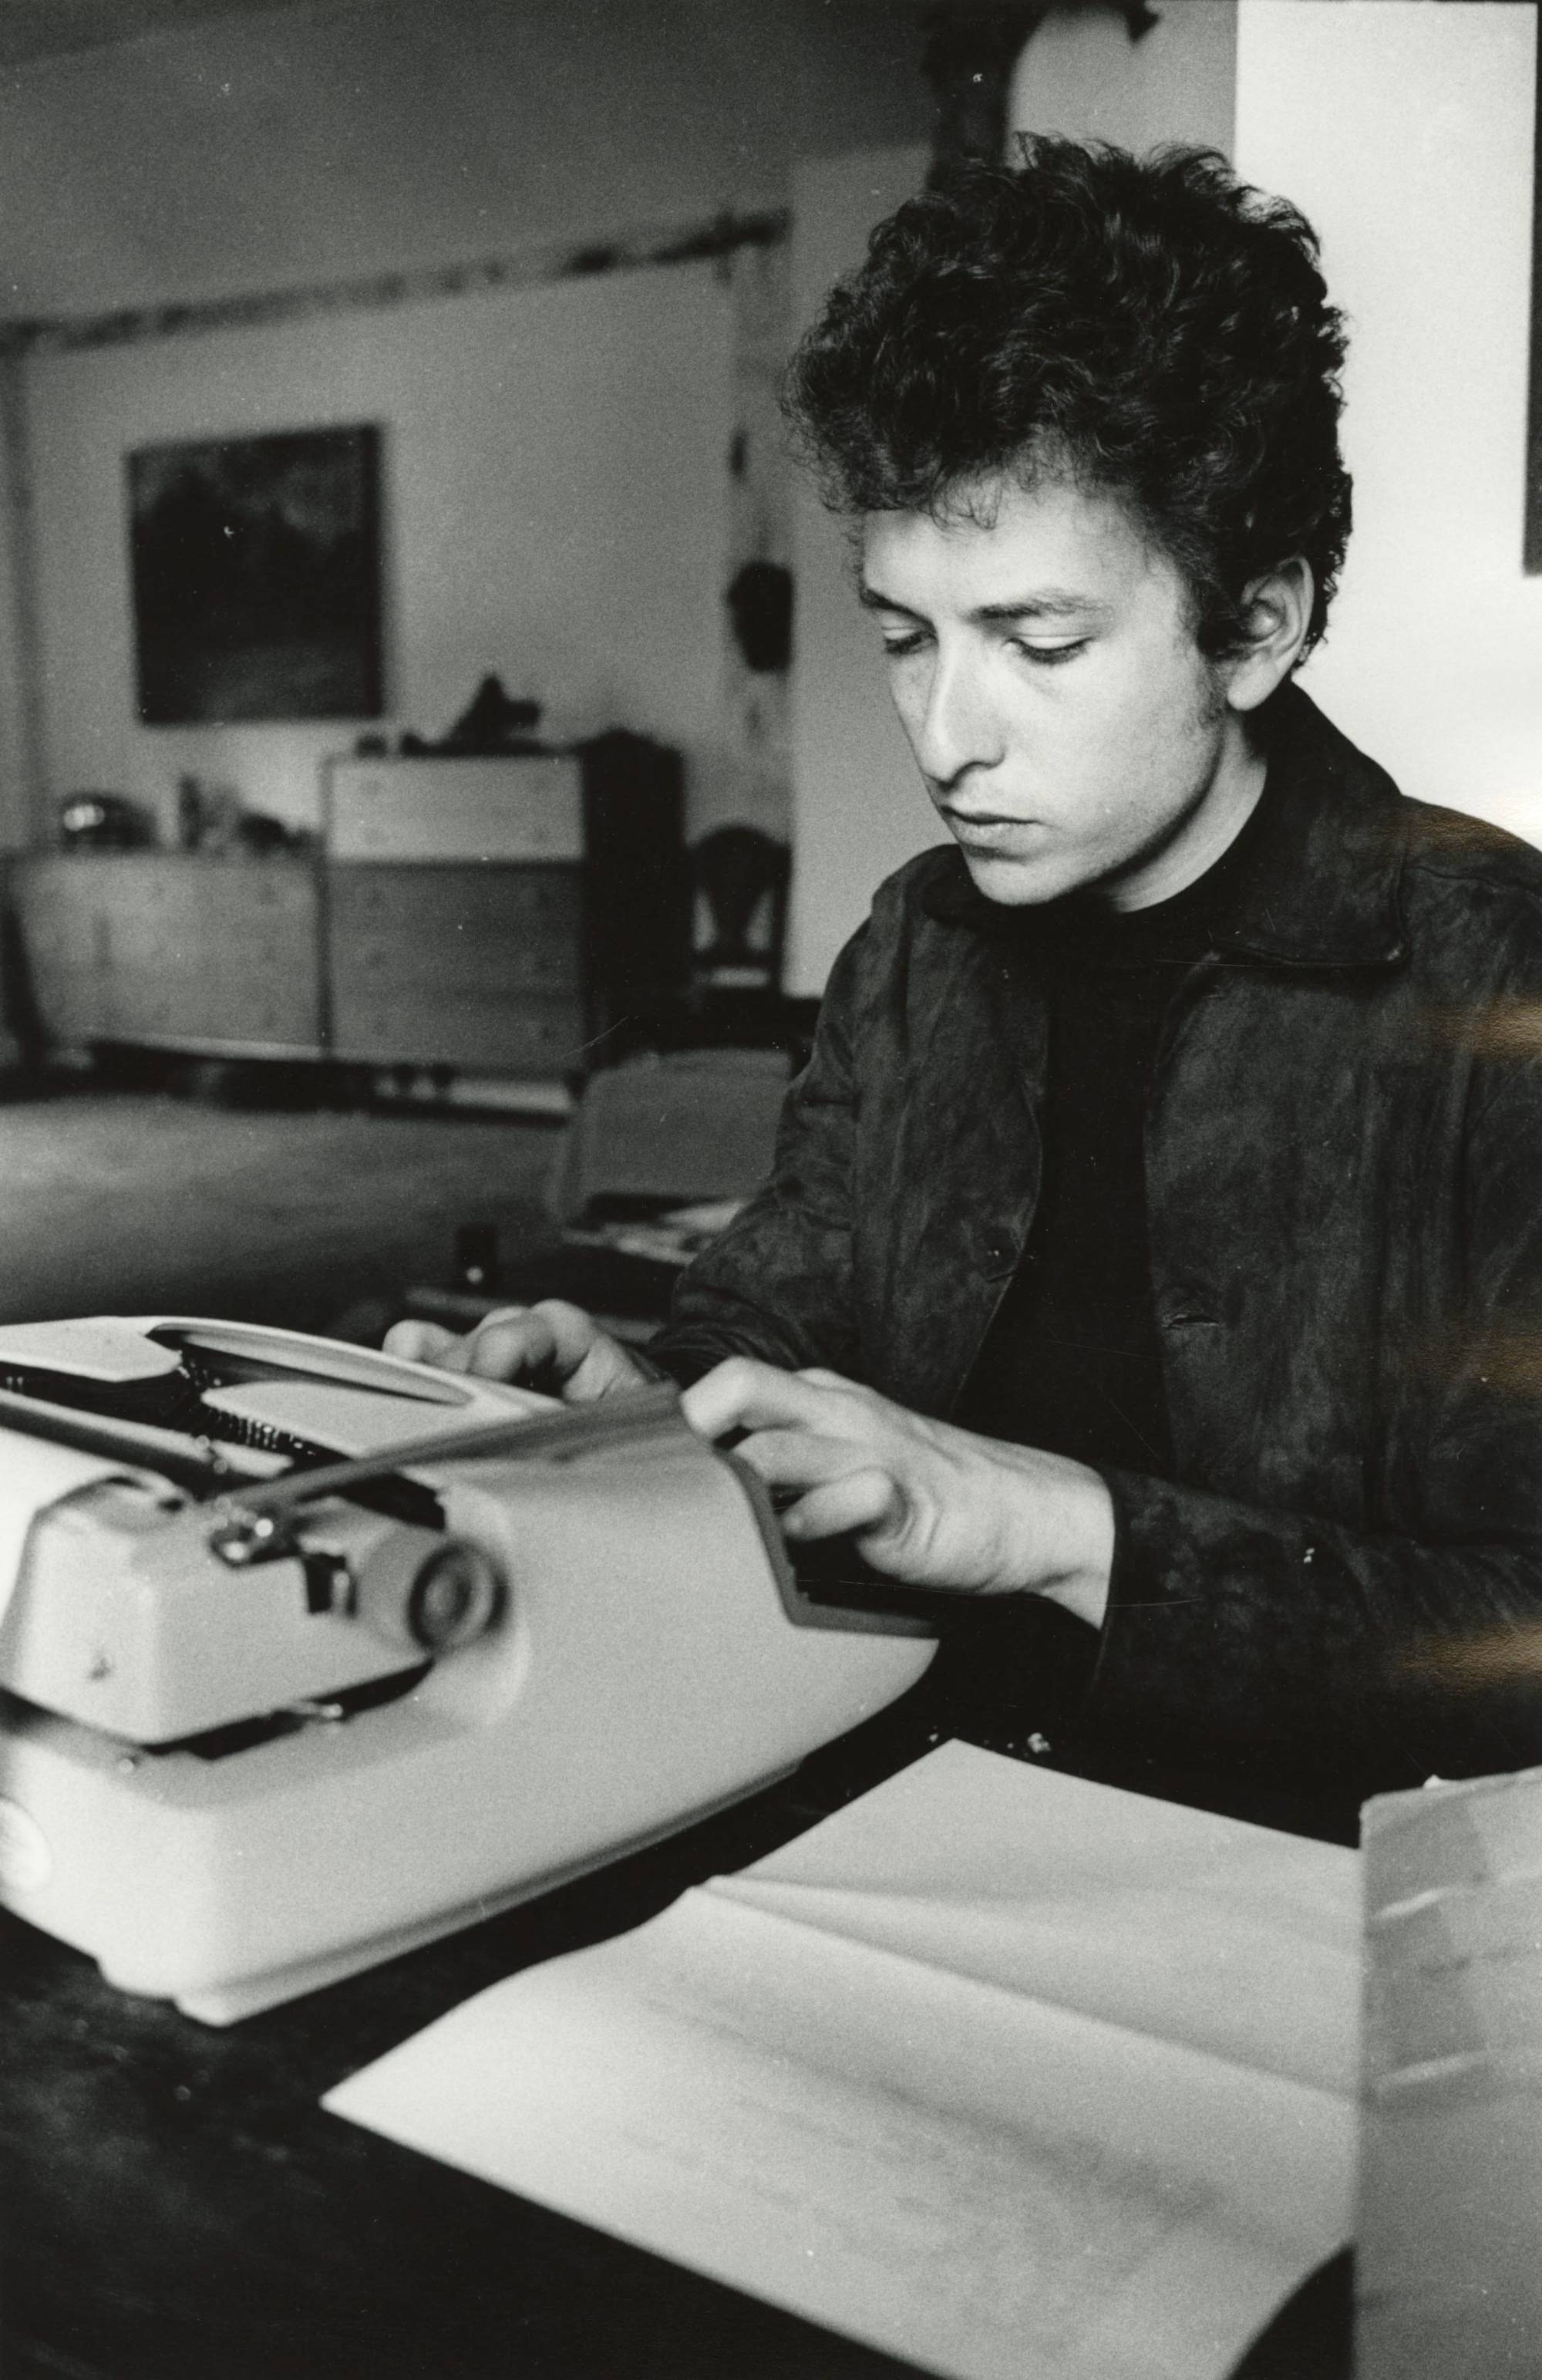 Photograph of Bob Dylan seated at desk with typewriter